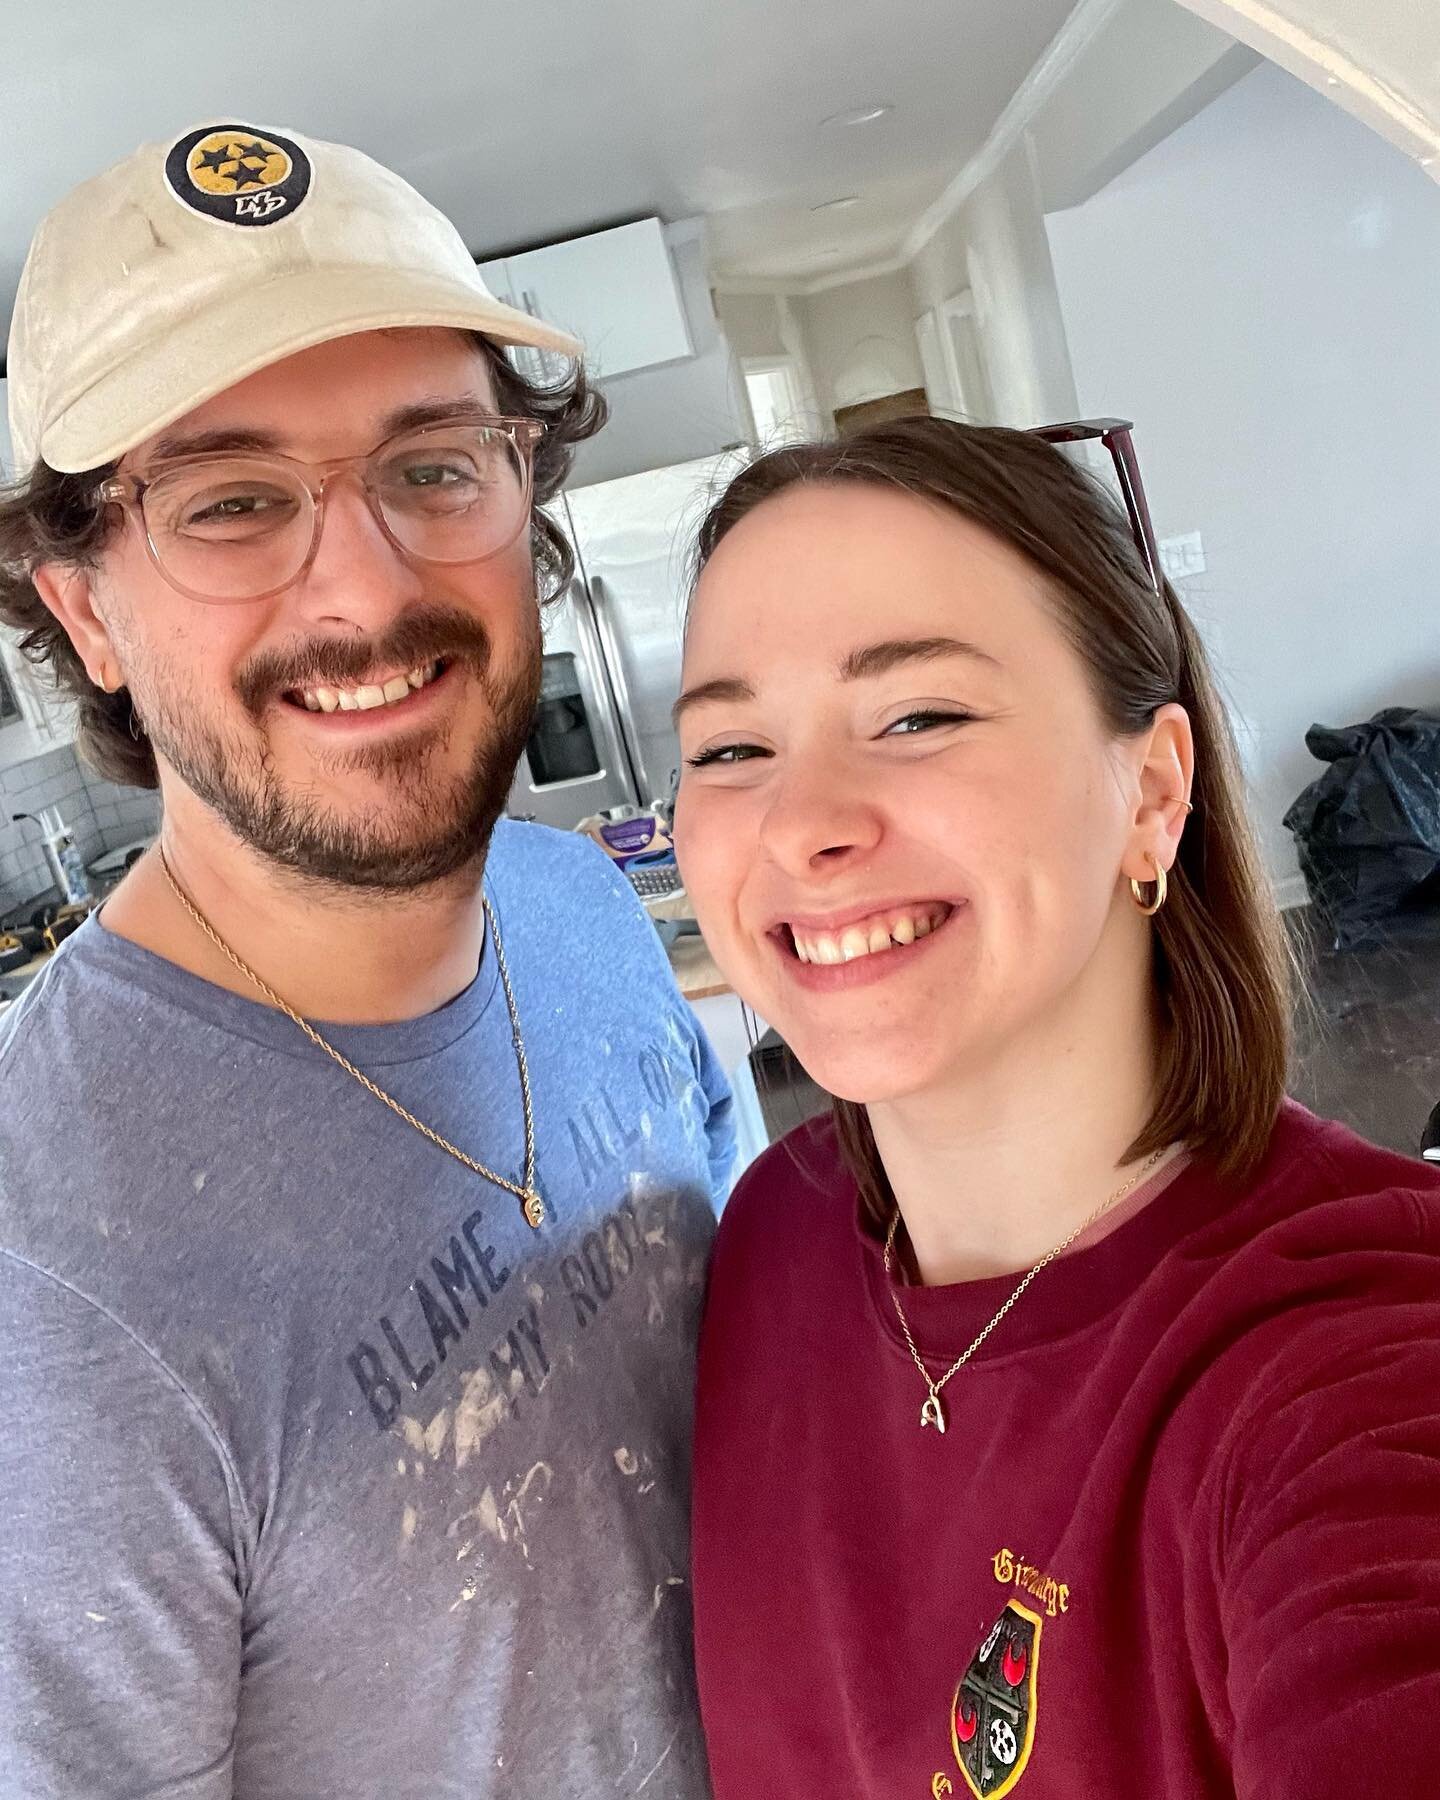 These cutie patooties are HOMEOWNERS! This is a perfect example of why I absolutely love my job. I first got connected with the fellow cutie patootie @caroline_west (thank you @betsy_coughlin!), and got to meet Will and Arden in the process! These th